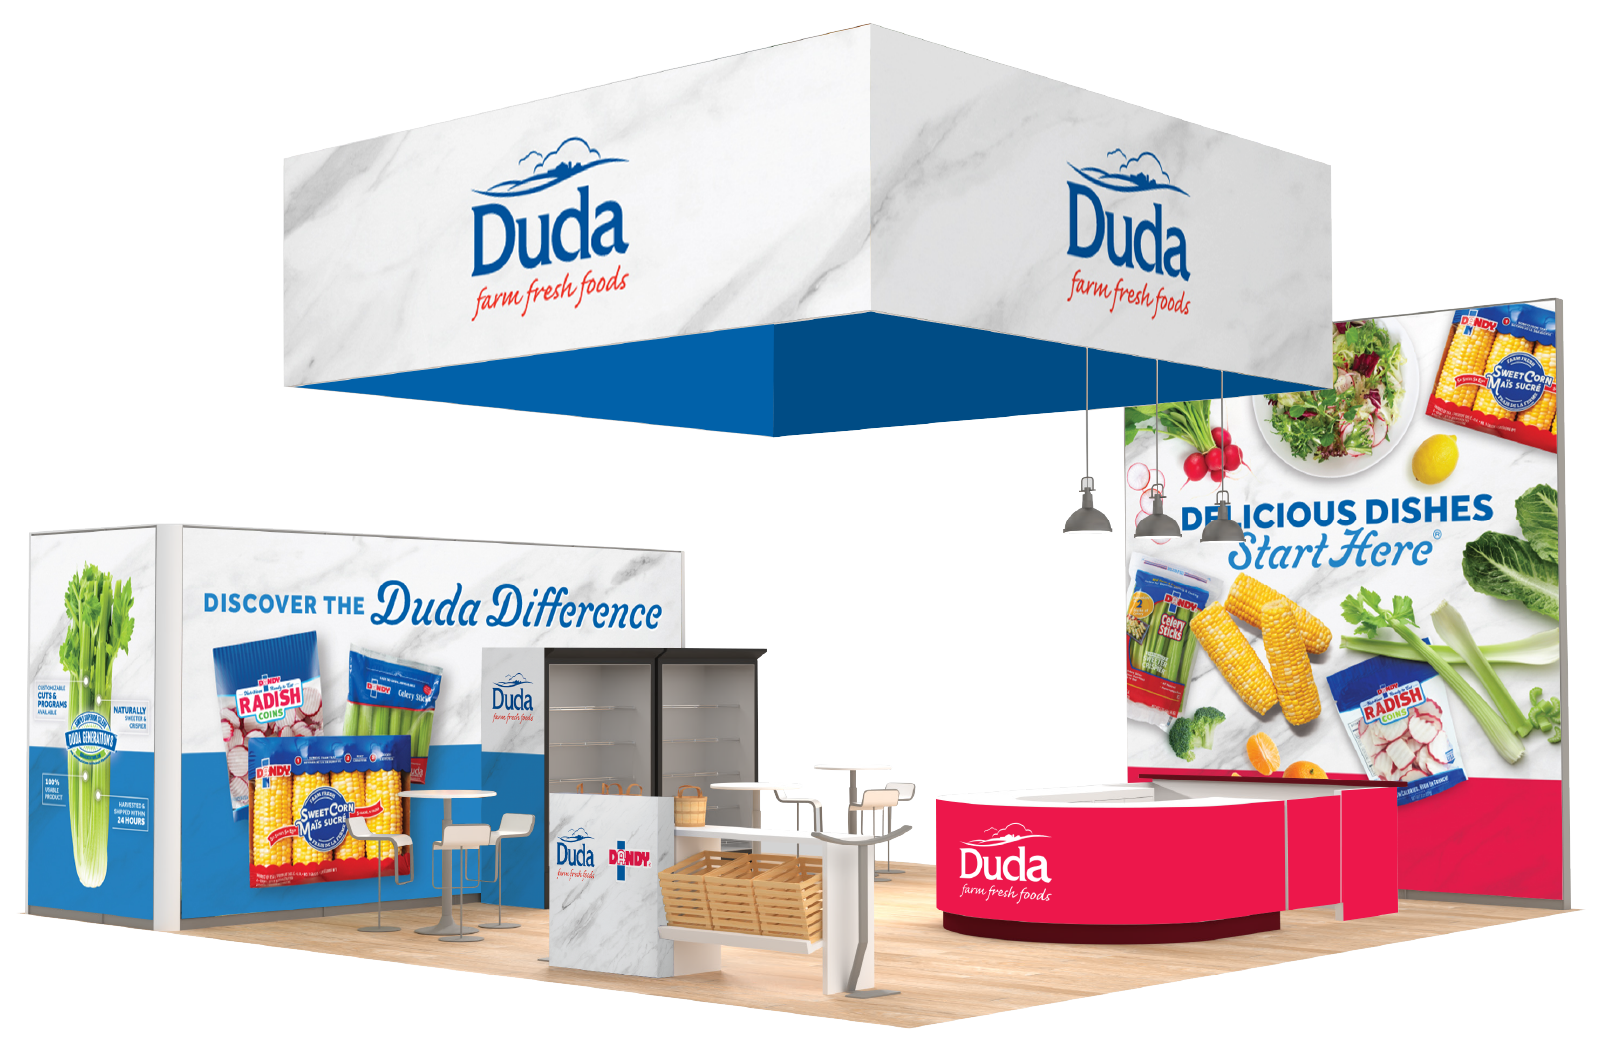 A mock-up of a tradeshow booth with images of Dandy products, the Duda and Dandy logos, and text that says "Delicious Dishes Start Here®"